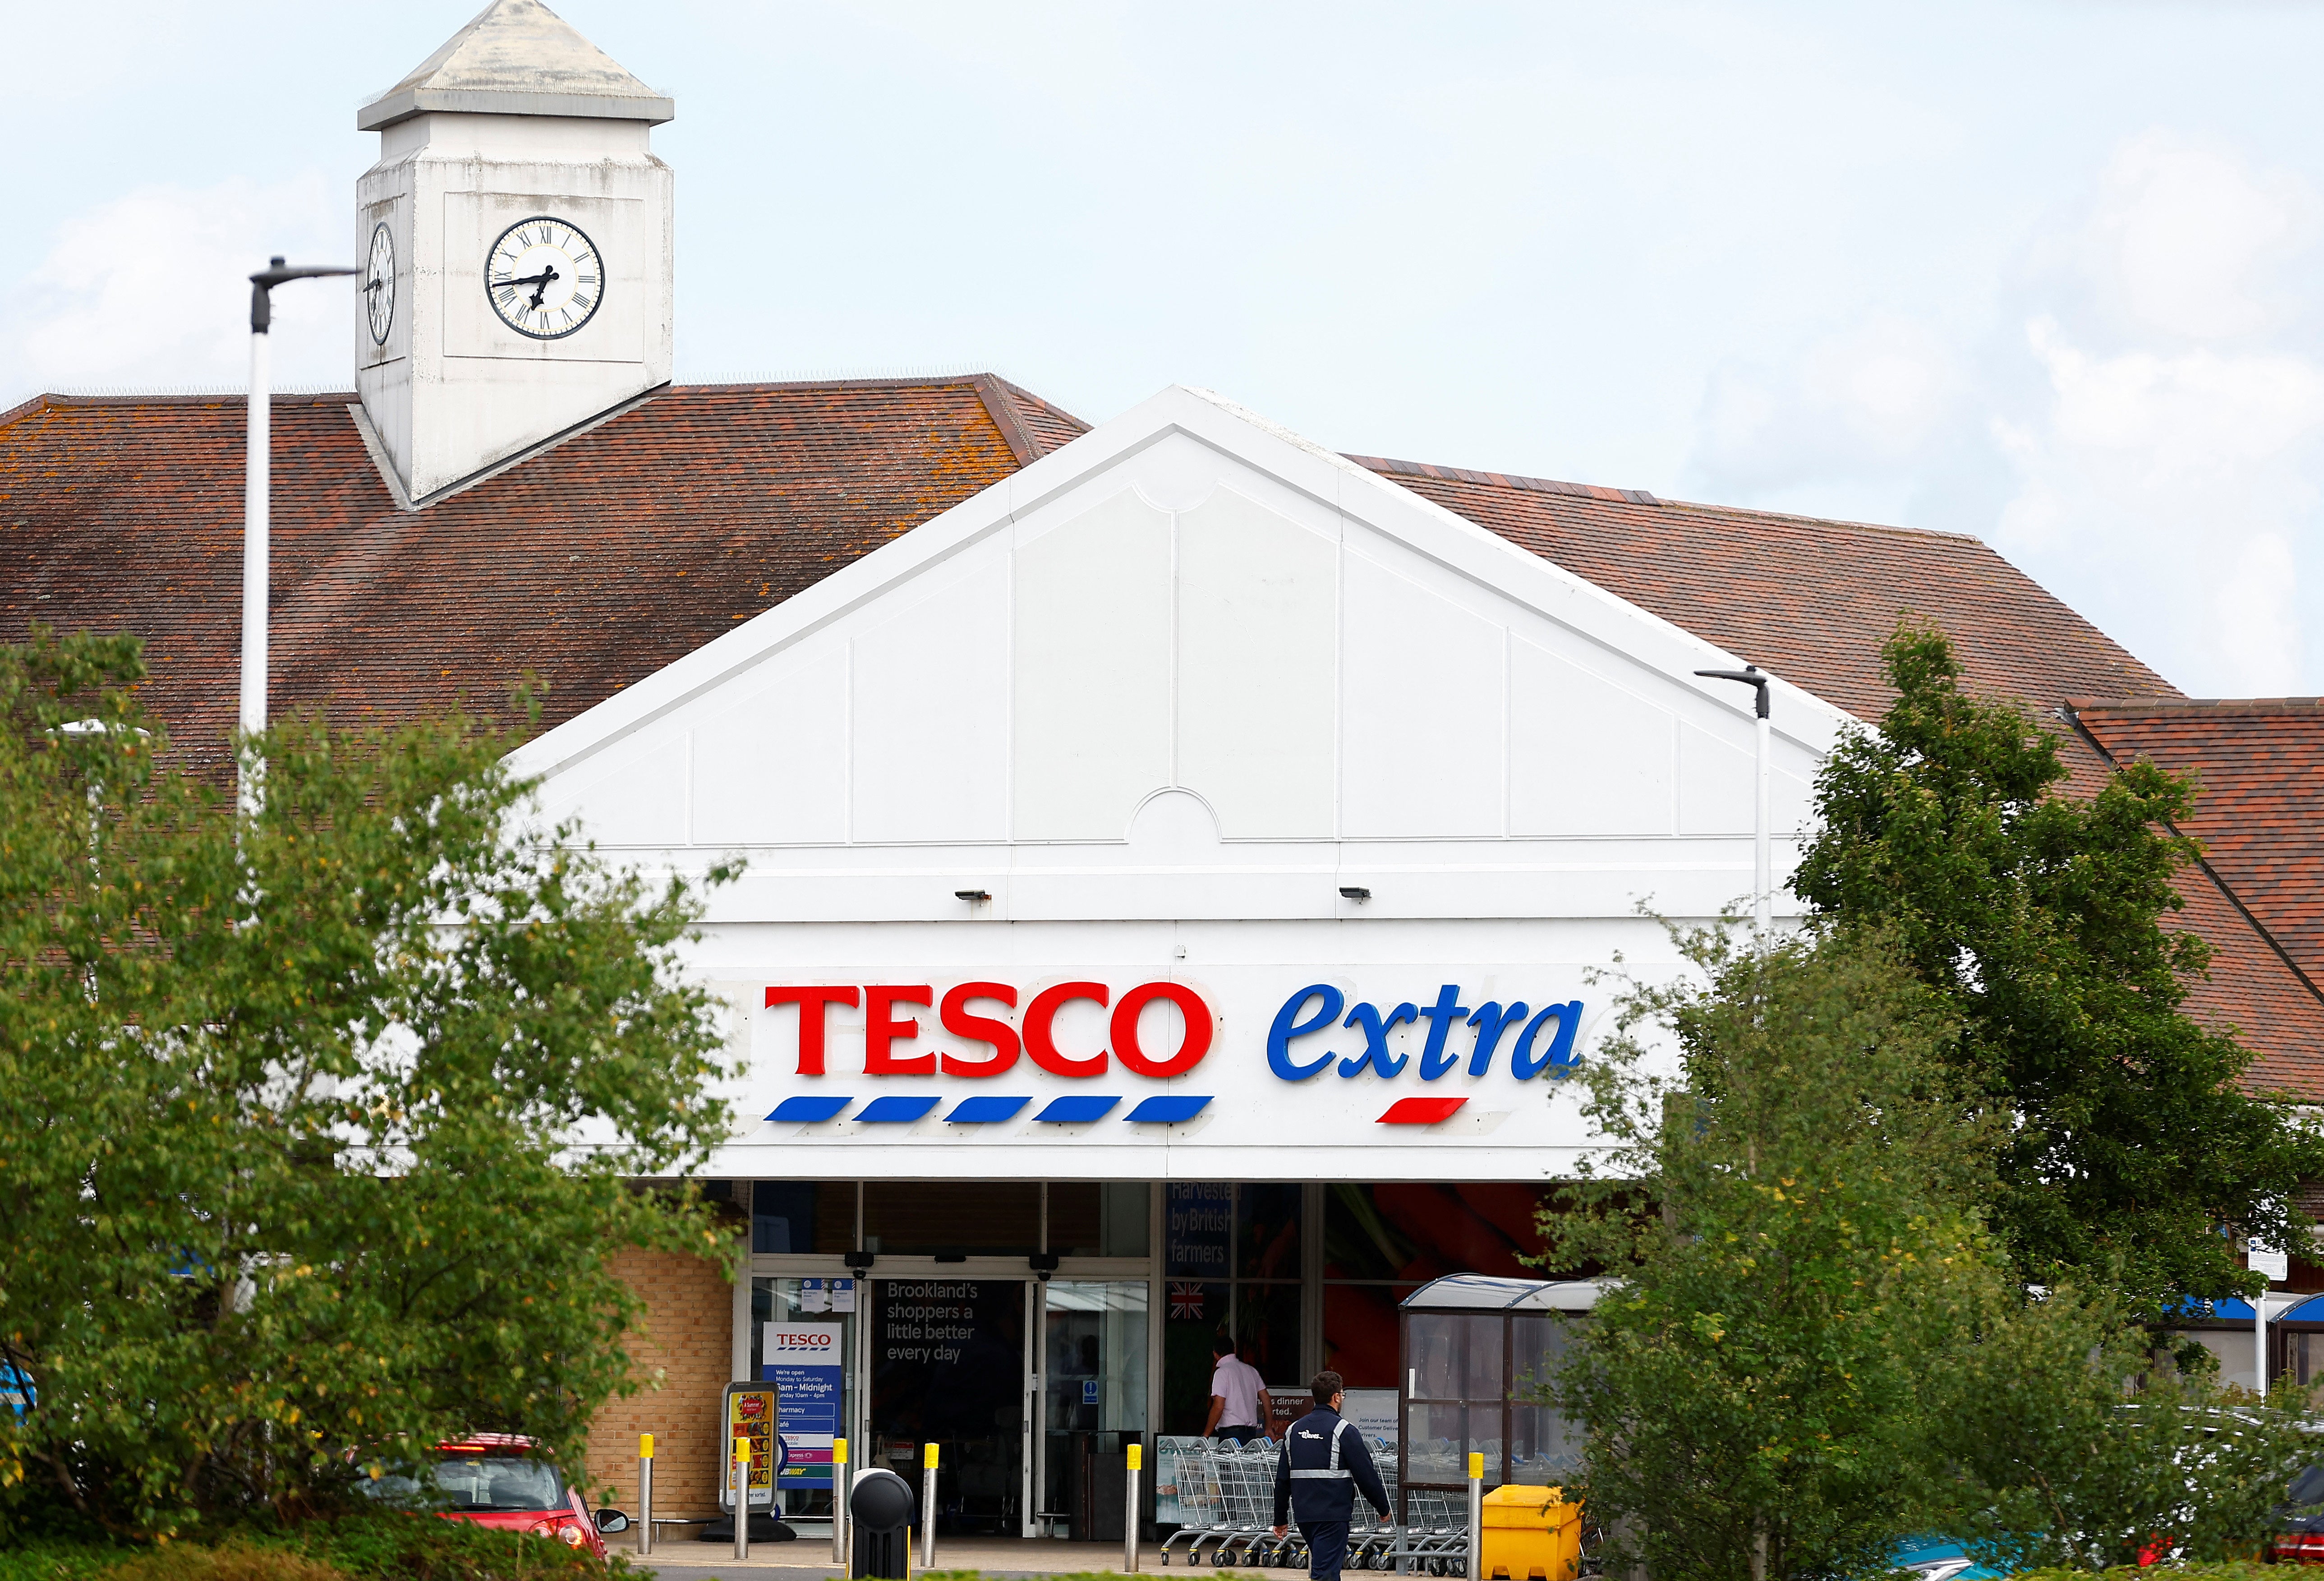 Food safety watchdogs issued a “do not eat” warning over the Tesco product